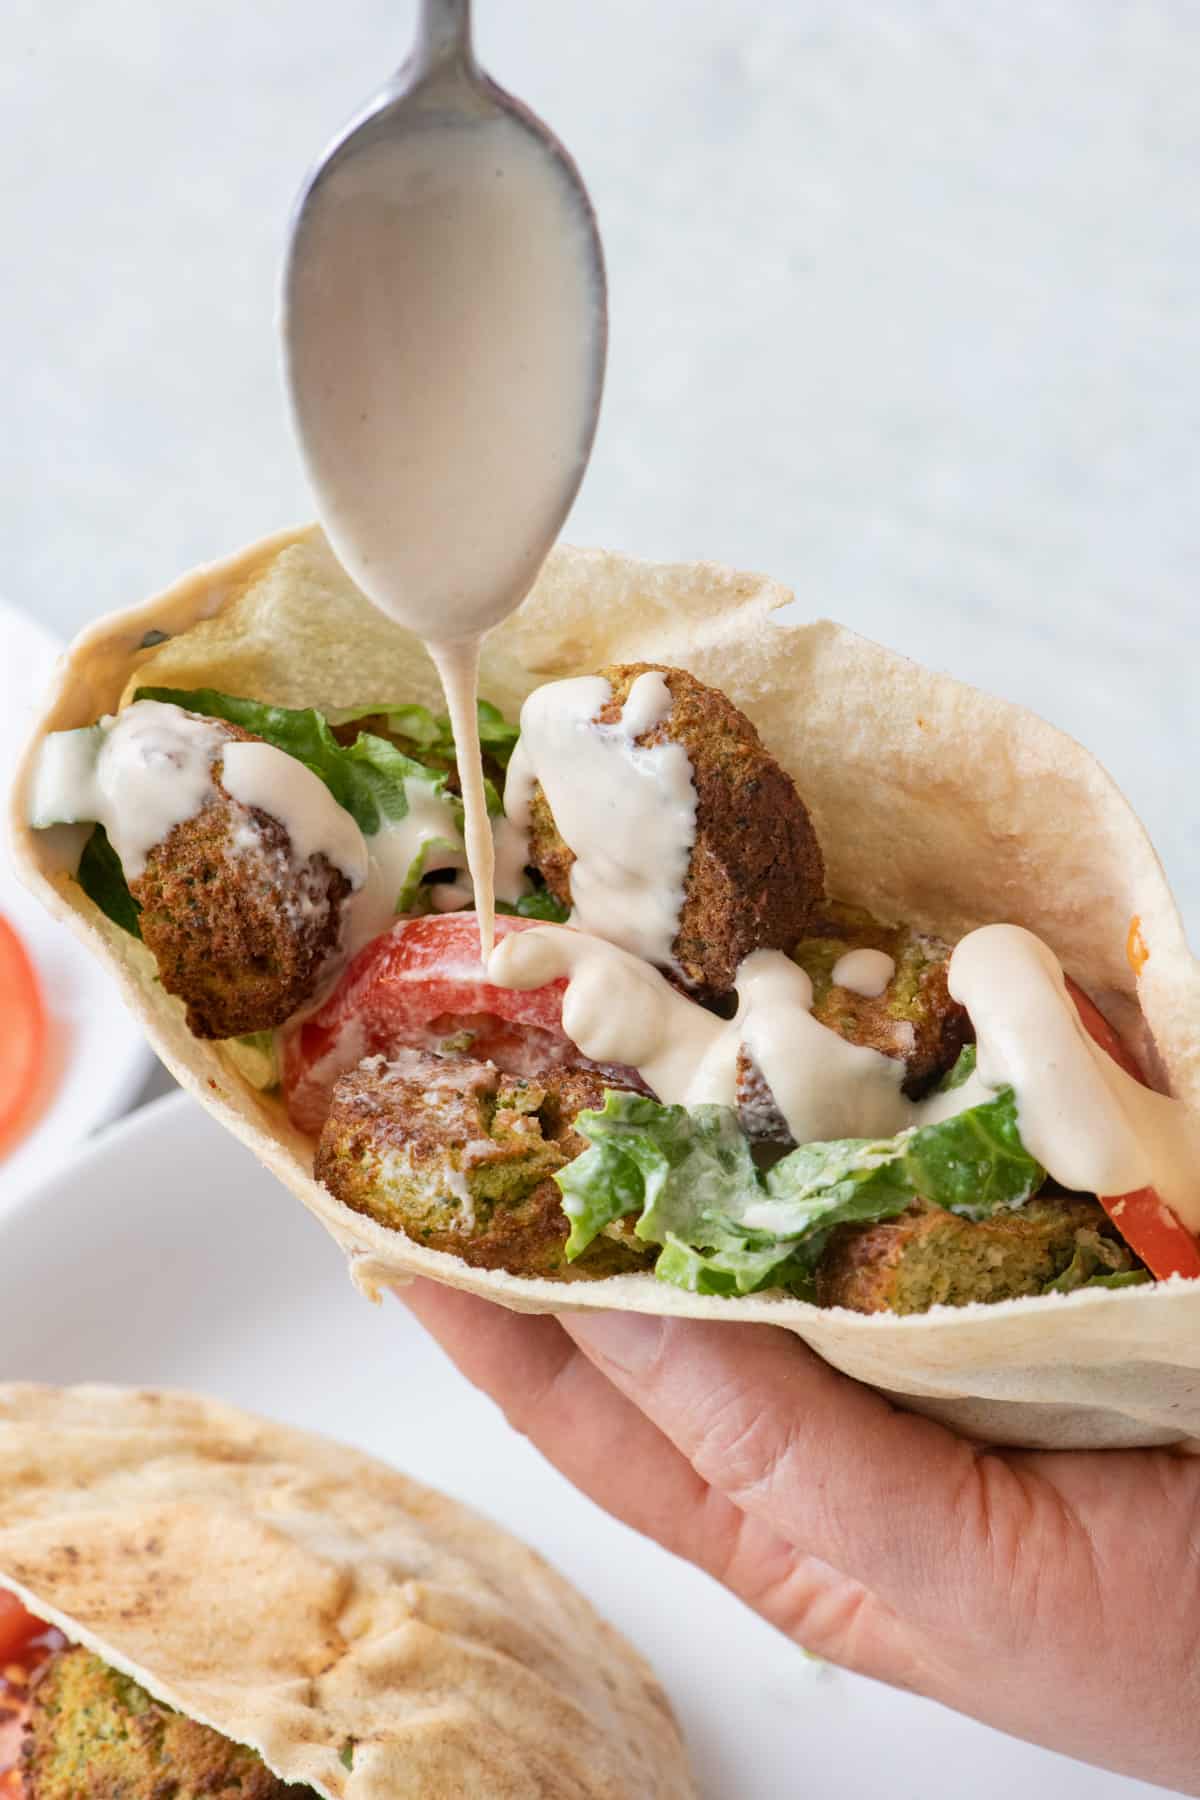 Spoon drizziling tahini over a pita sandwich with falafel, lettuce, and tomato.